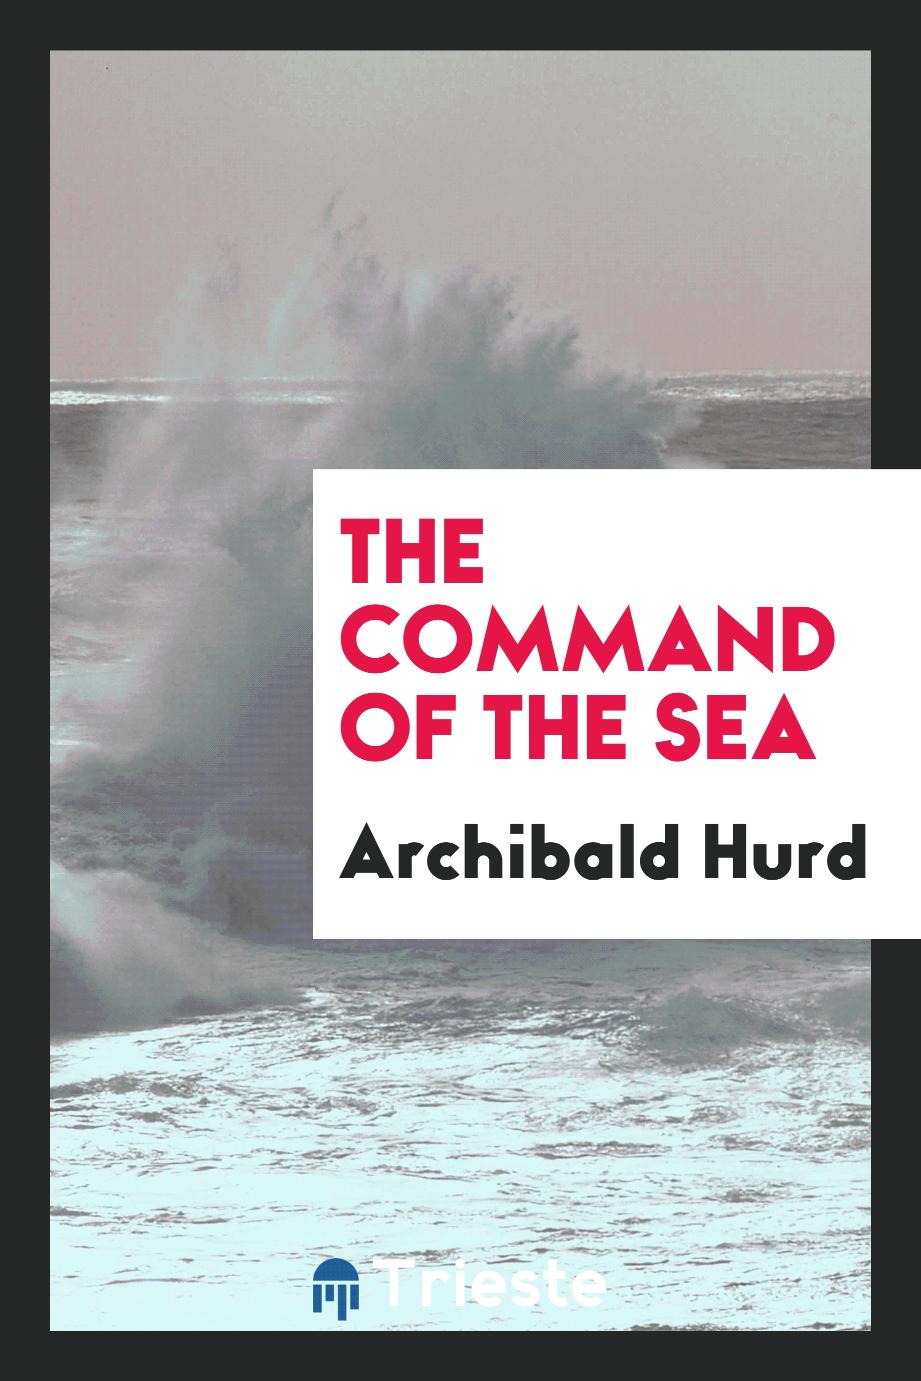 The command of the sea